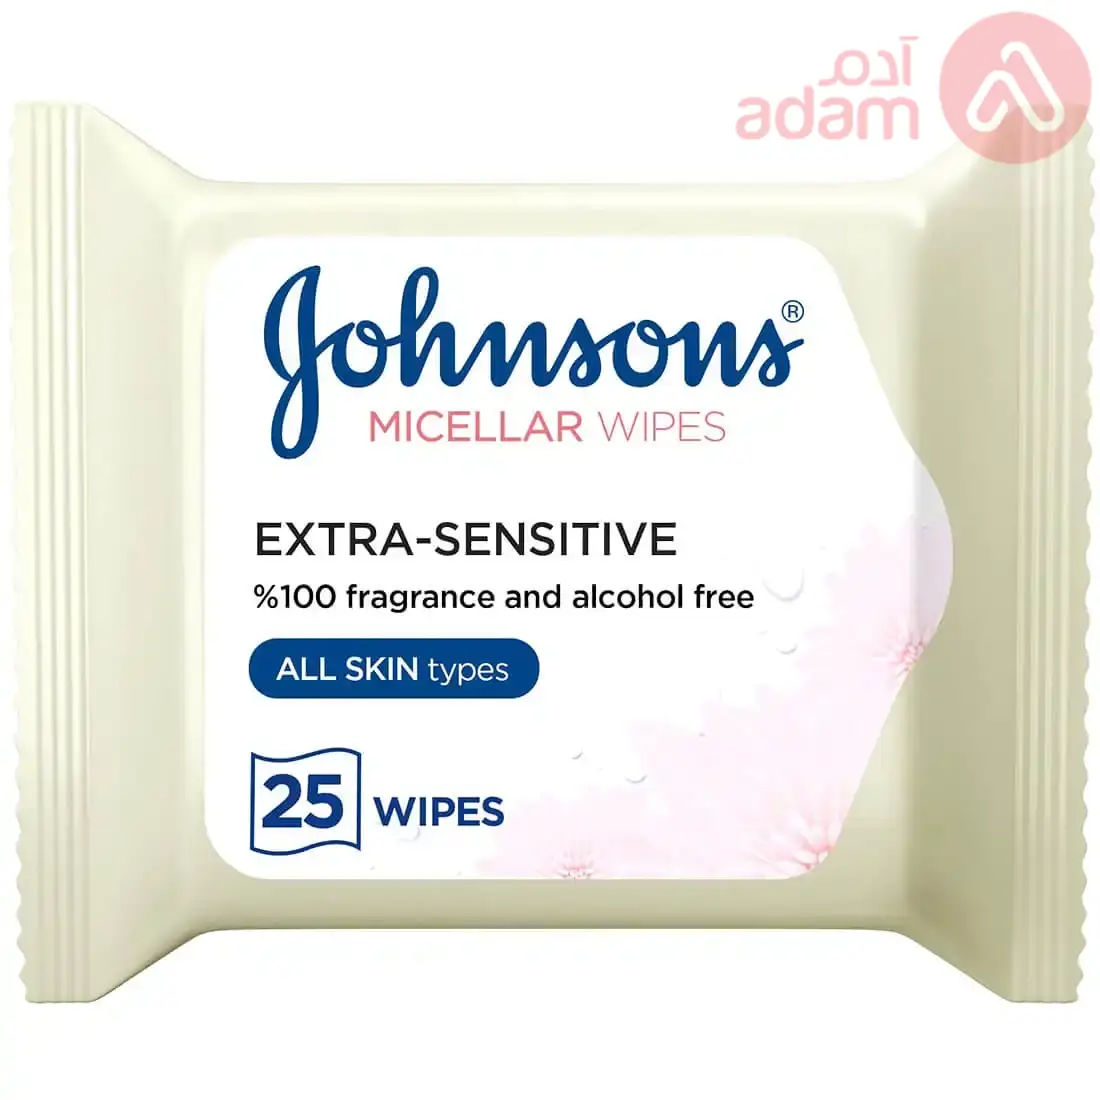 Johnson Face Wipes Daily Essentials Extra Sensitive All Type Skin | 25Wipes